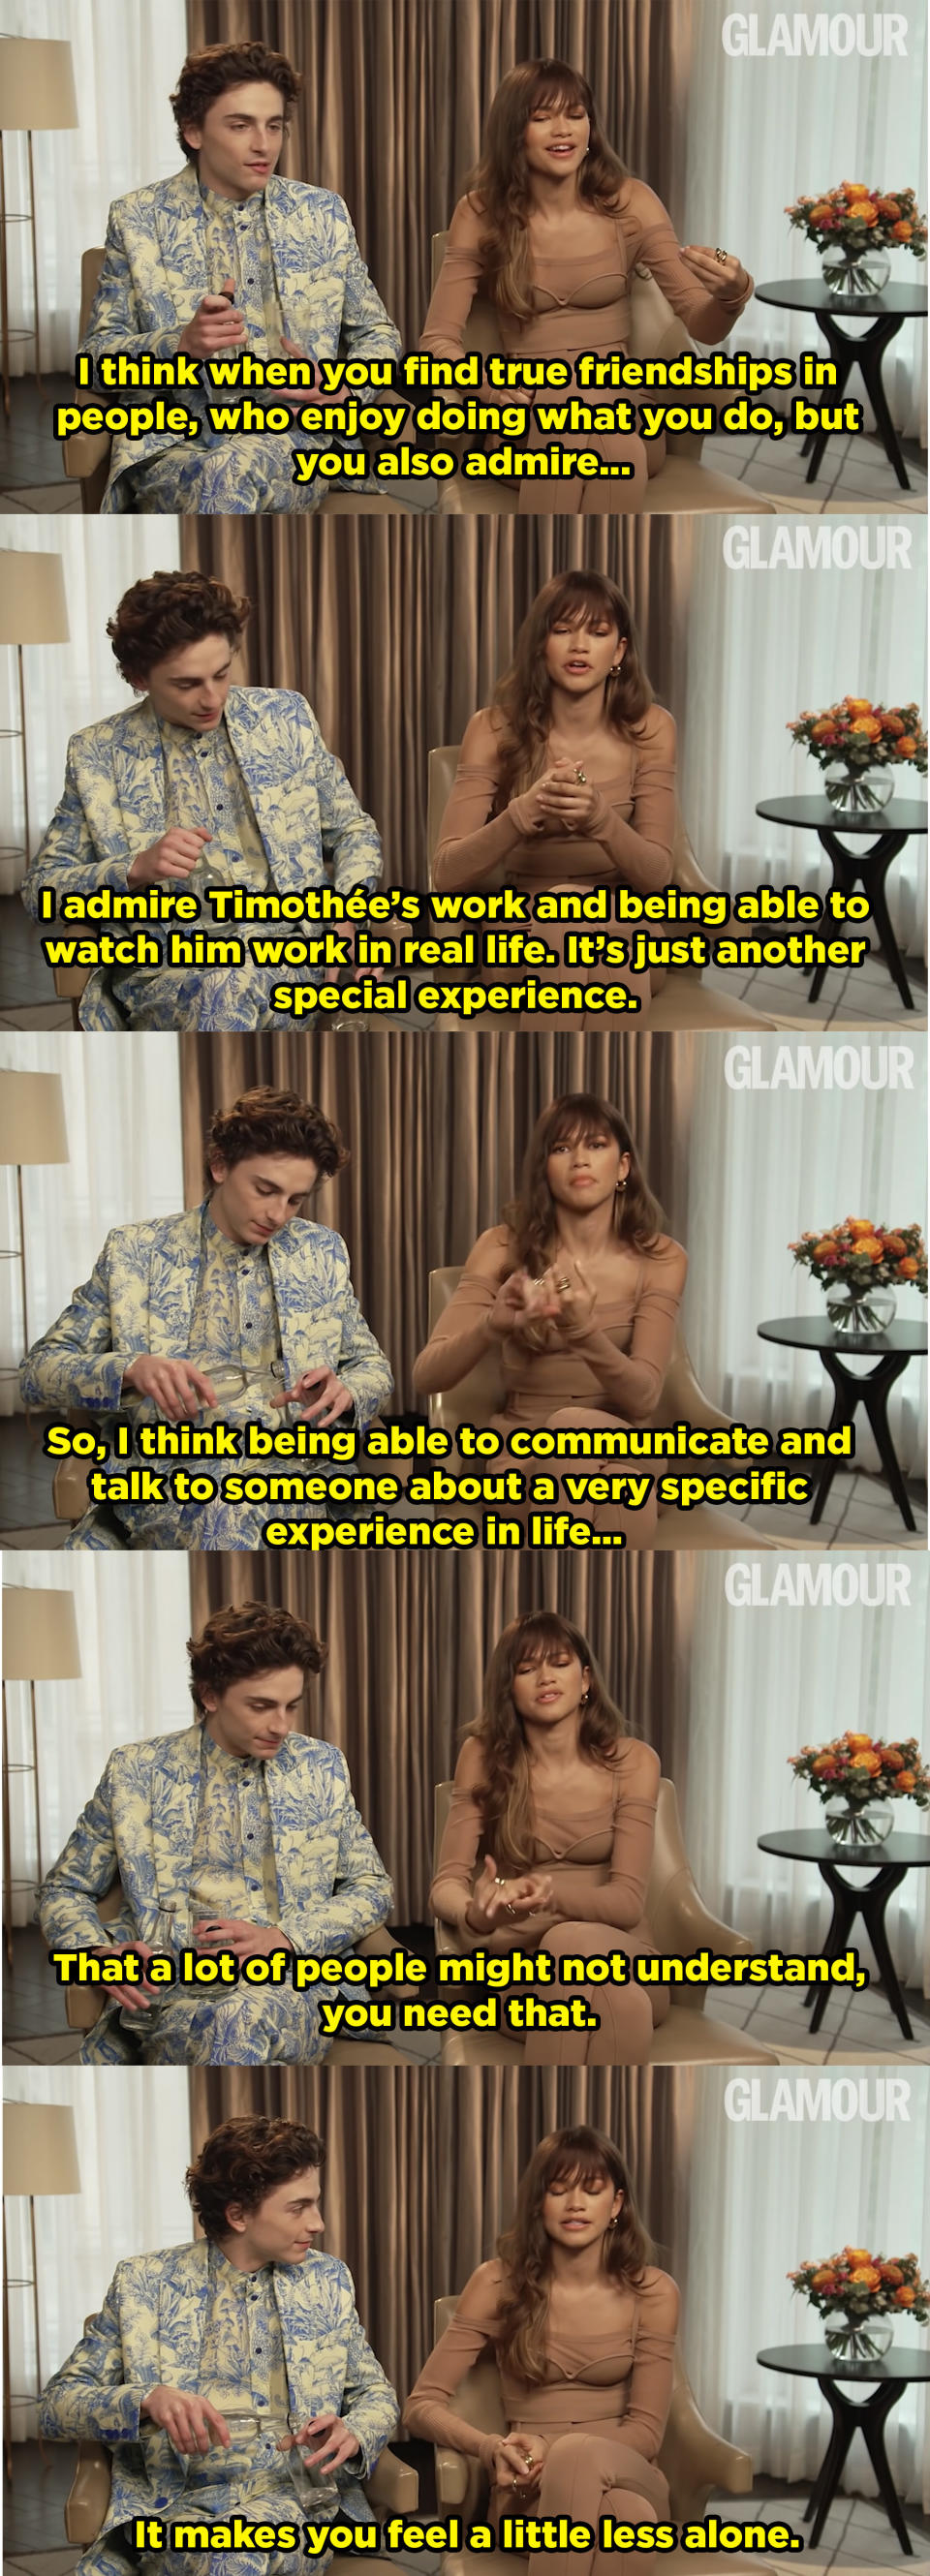 Zendaya talks about how being friends with Timmy makes her feel less alone. Meanwhile Timmy is trying to pour a glass of water without disrupting but makes it even more awkward because he's trying not to be awkward.